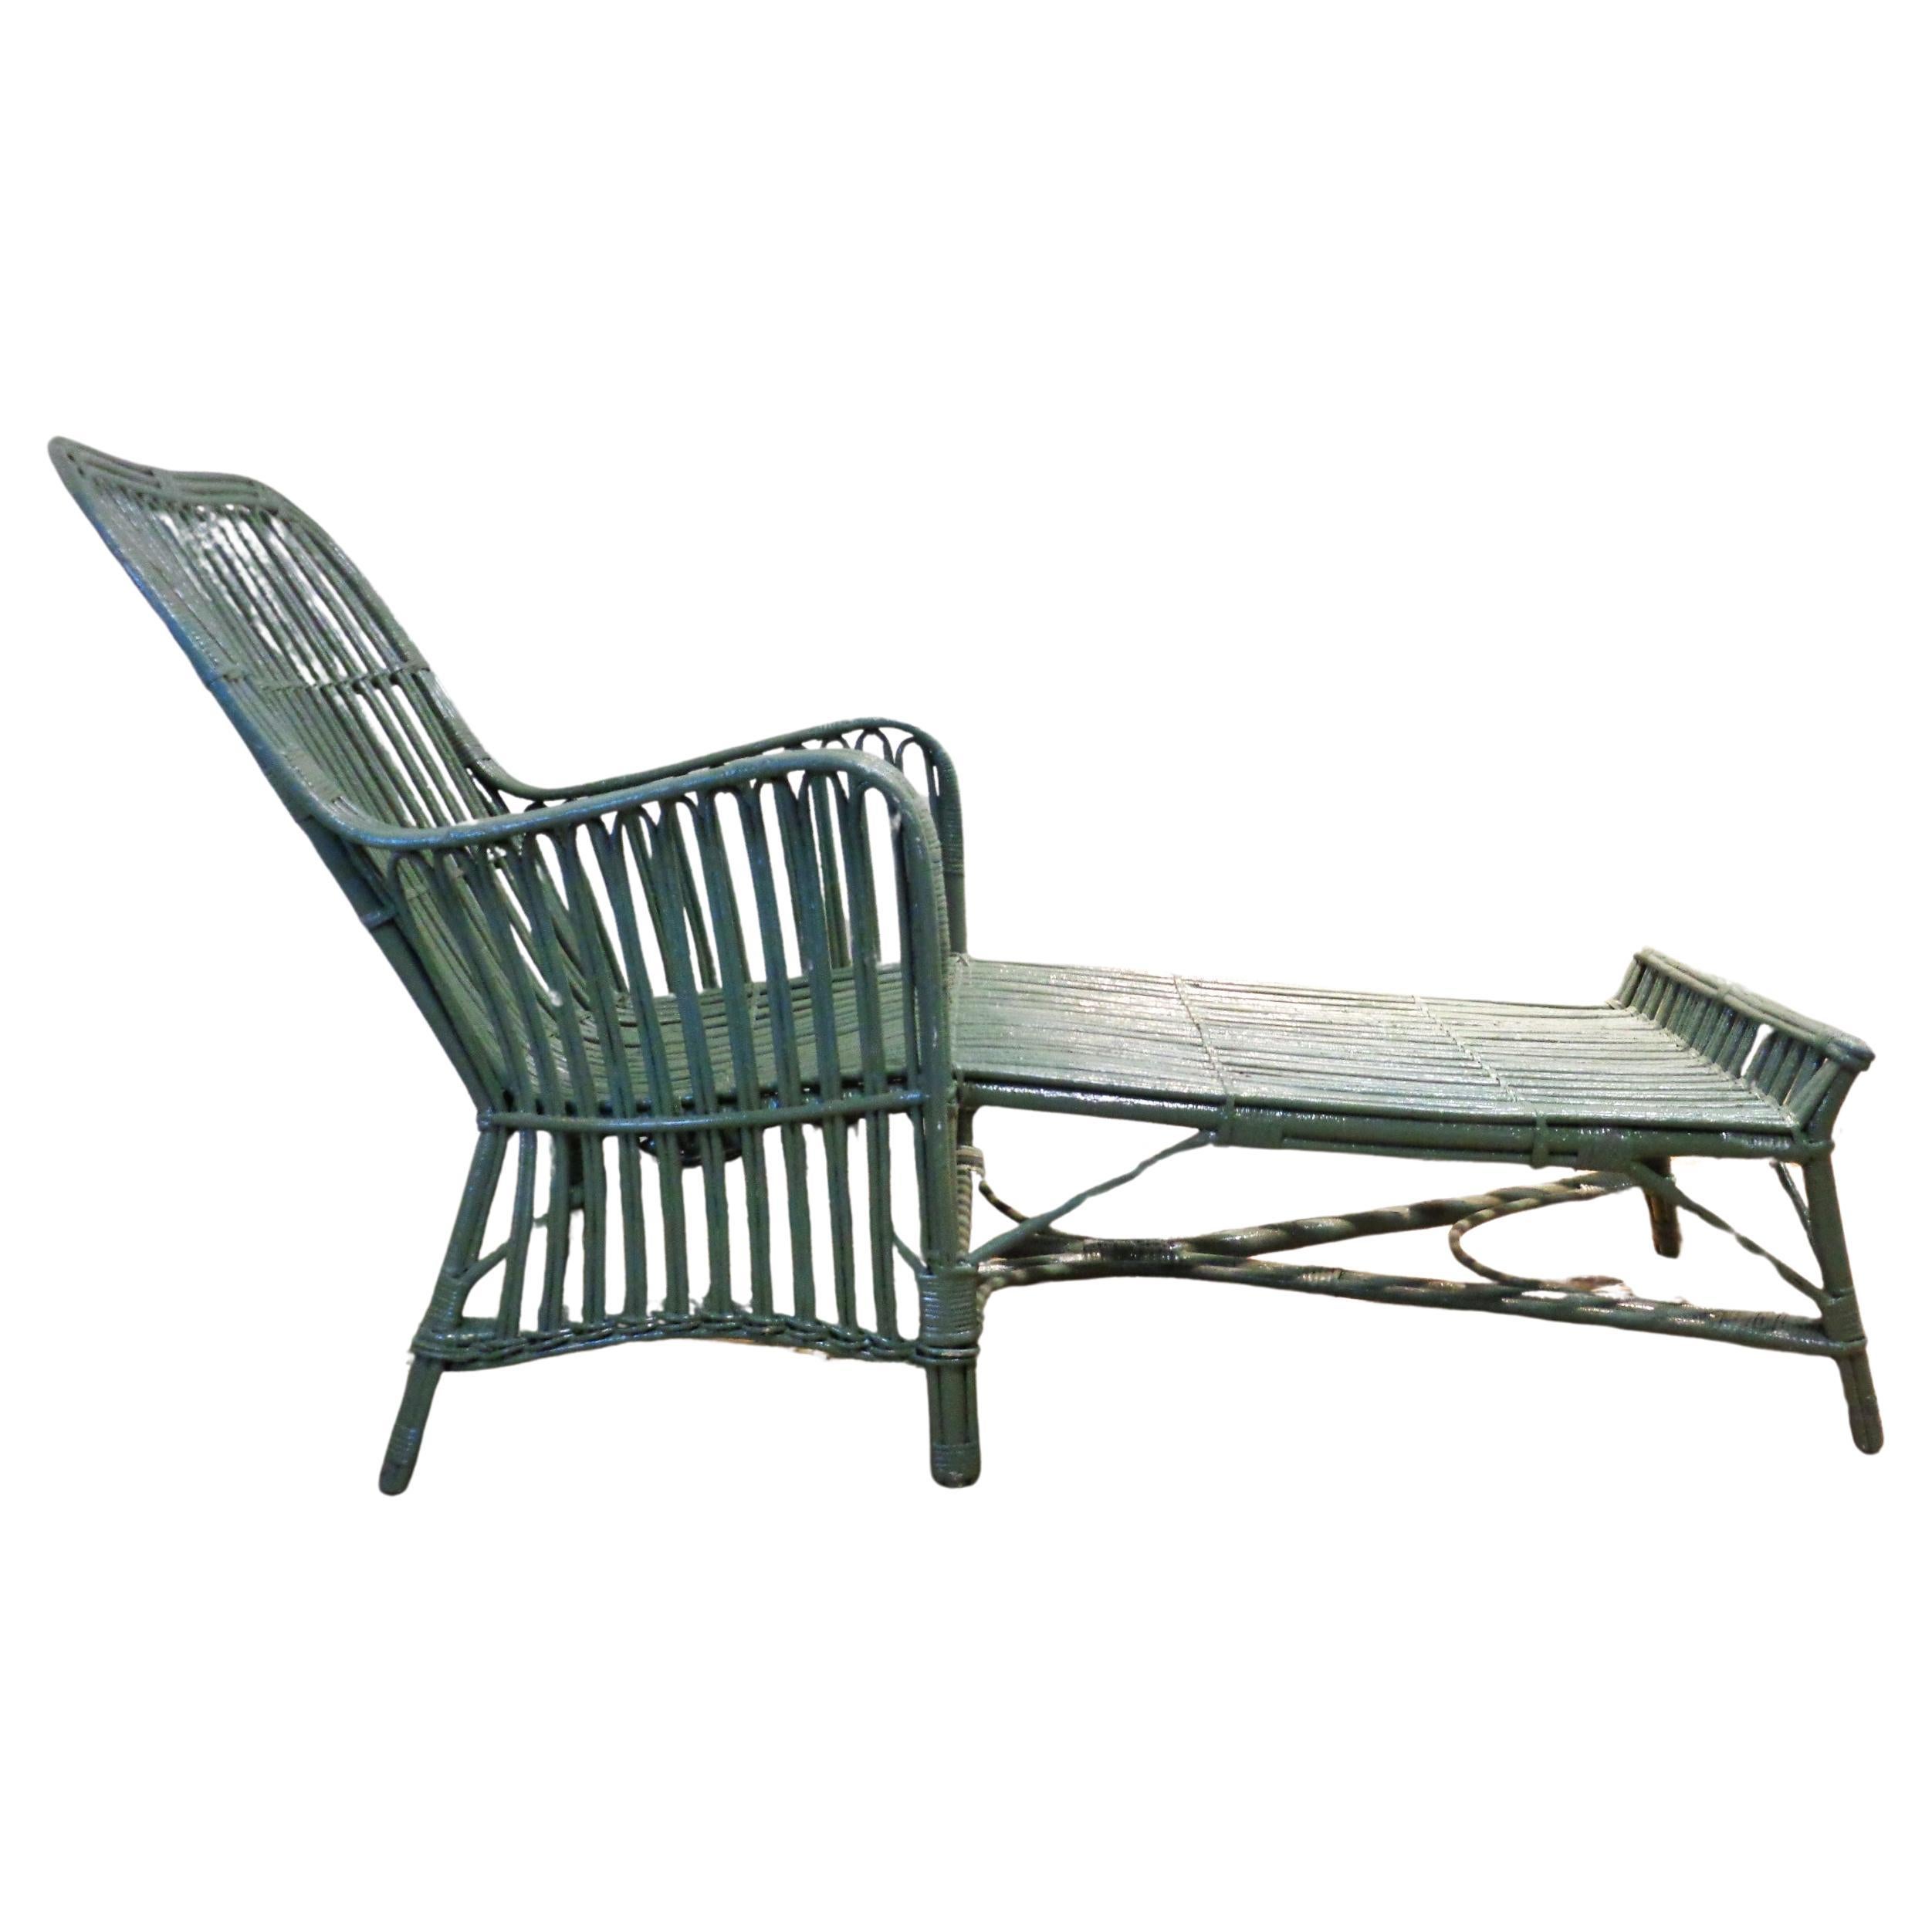 American Antique Stick Wicker Chaise Lounge Heywood-Wakefield Attributed Circa 1930 For Sale